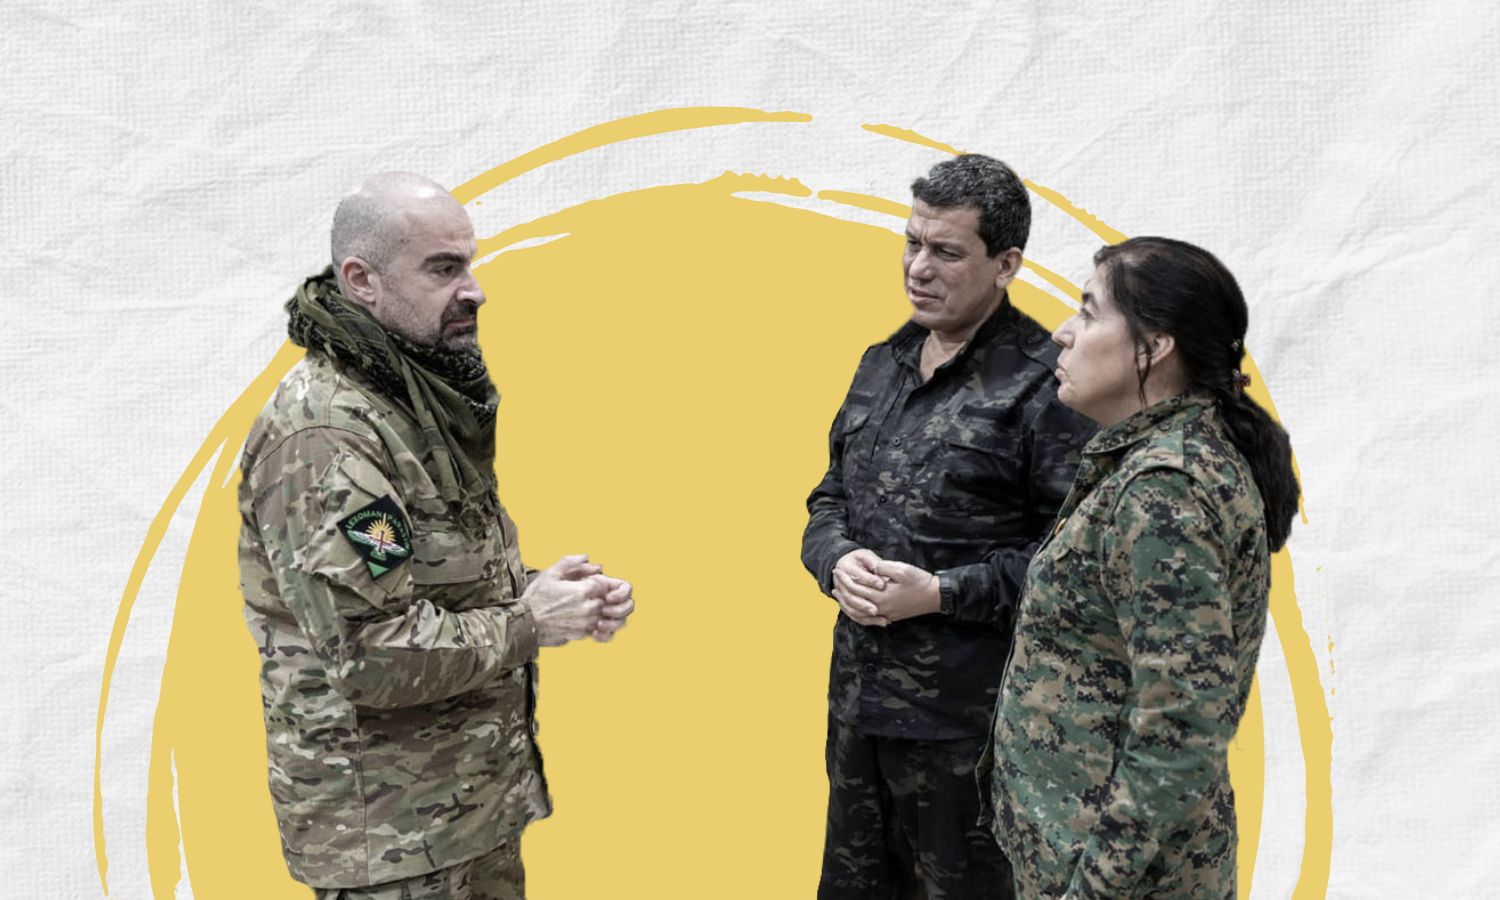 Bafel Talabani, leader of the Patriotic Union of Kurdistan, and SDF commander Mazloum Abdi, in the presence of an official woman from the Autonomous Administration in al-Hasakah (edited by Enab Baladi)